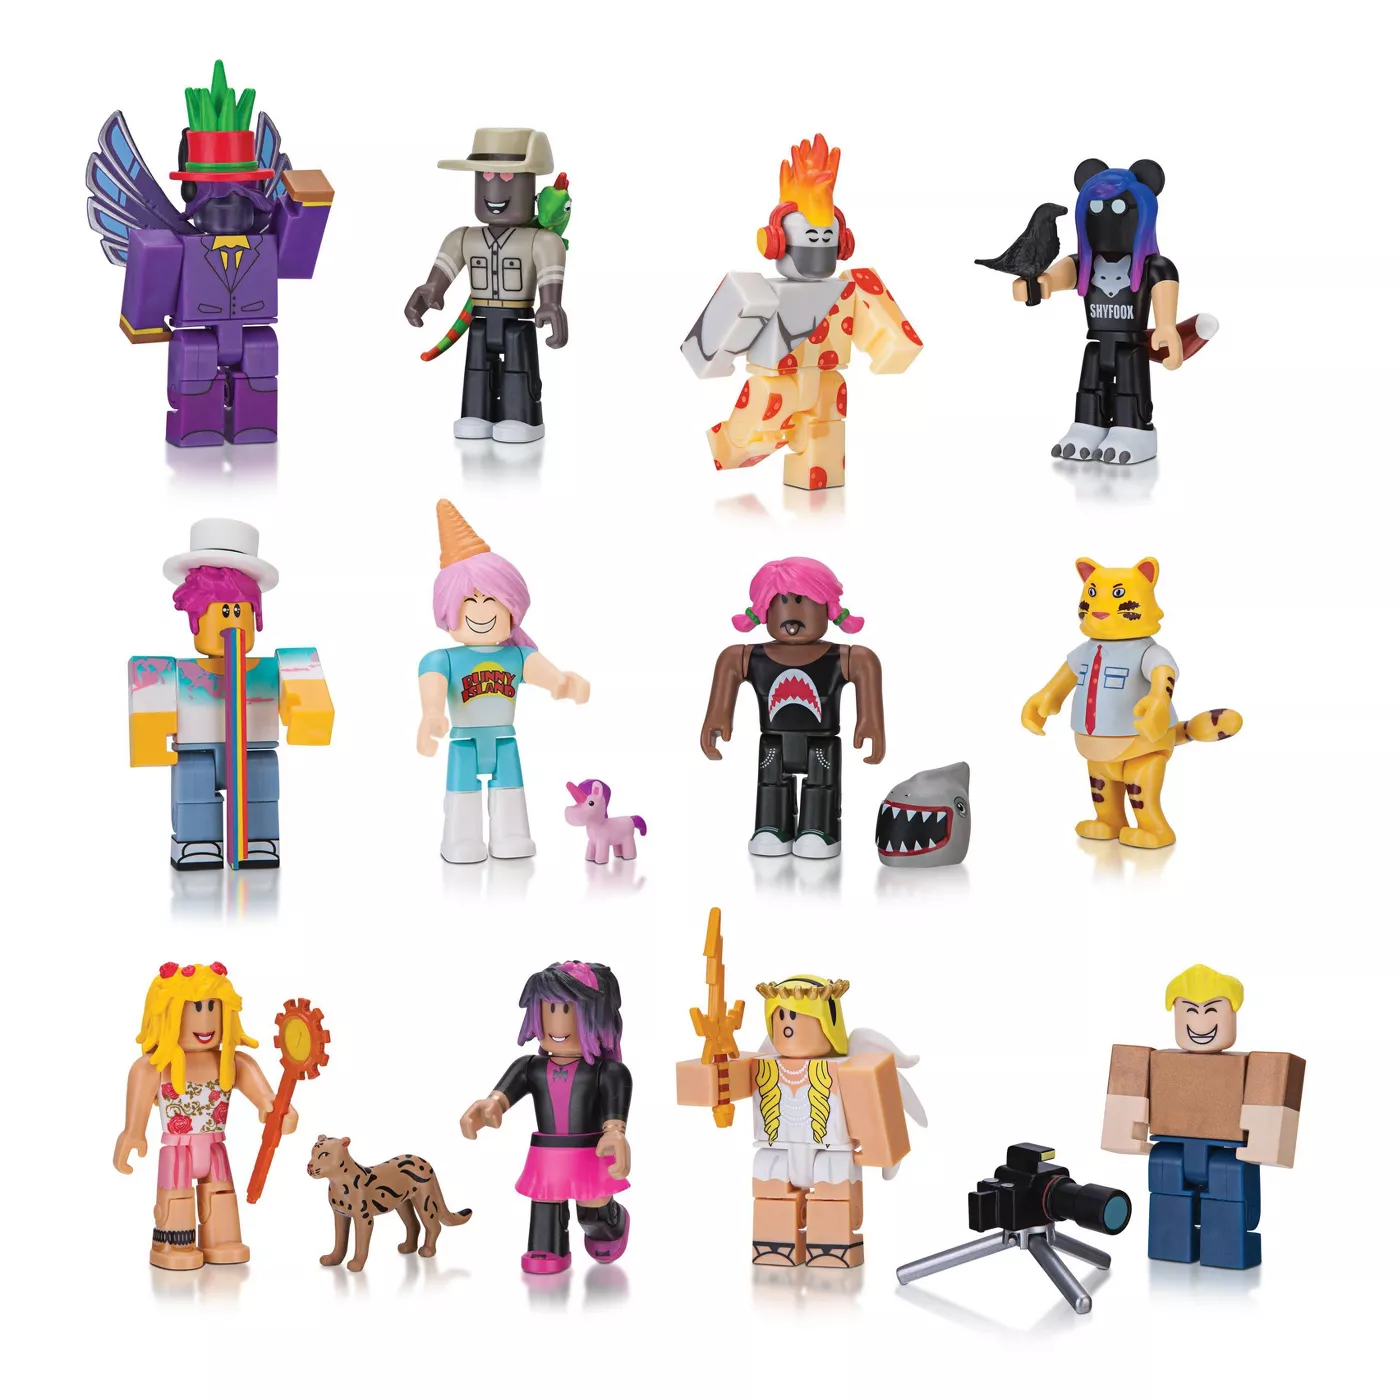 Details About Roblox Celebrity Gold Series 2 Toys 18pc Set Billboard Guy Rainbow Barf No Codes - details about roblox celebrity gold series 2 toys 18pc set billboard guy rainbow barf no codes